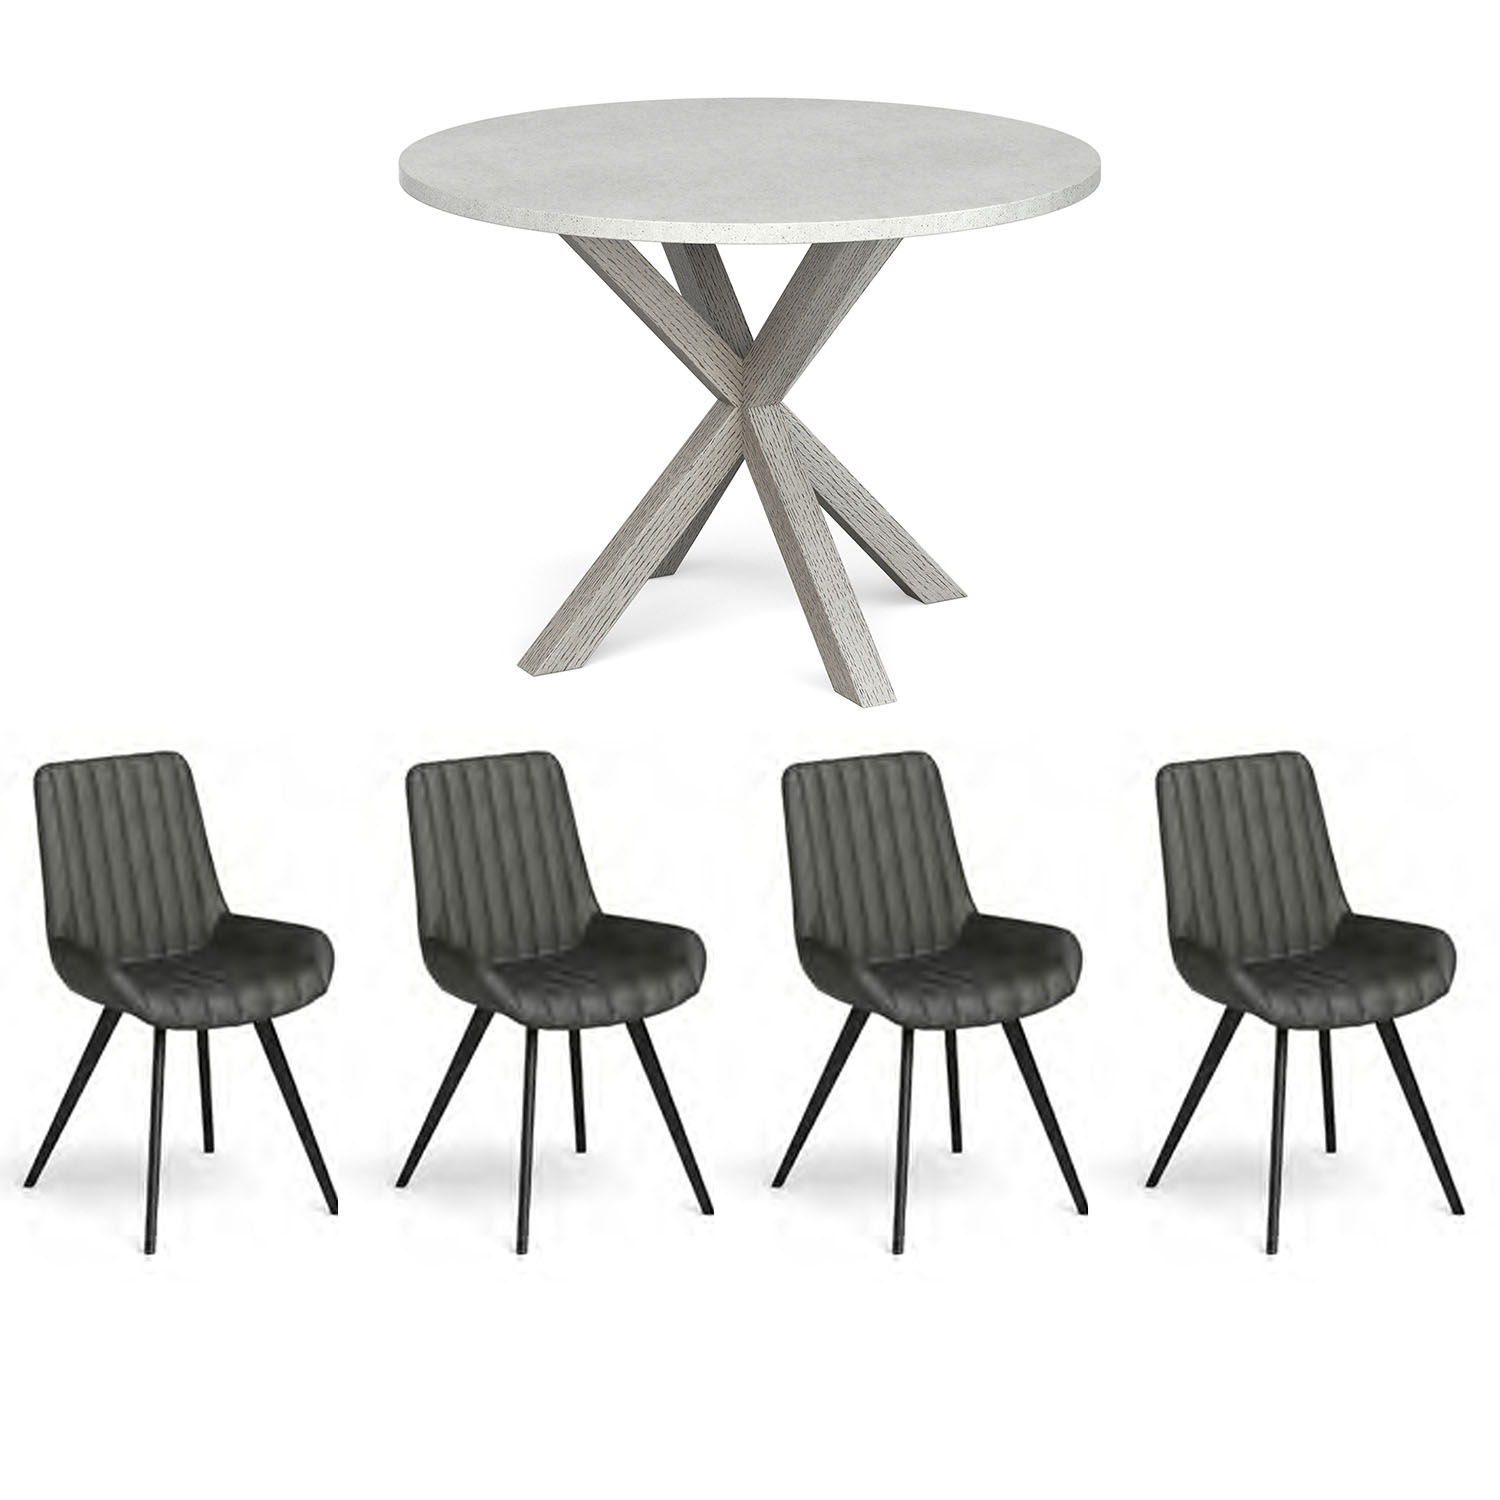 Harbour Round Dining Table X4 Dining Chair Set Collingwood Batchellor